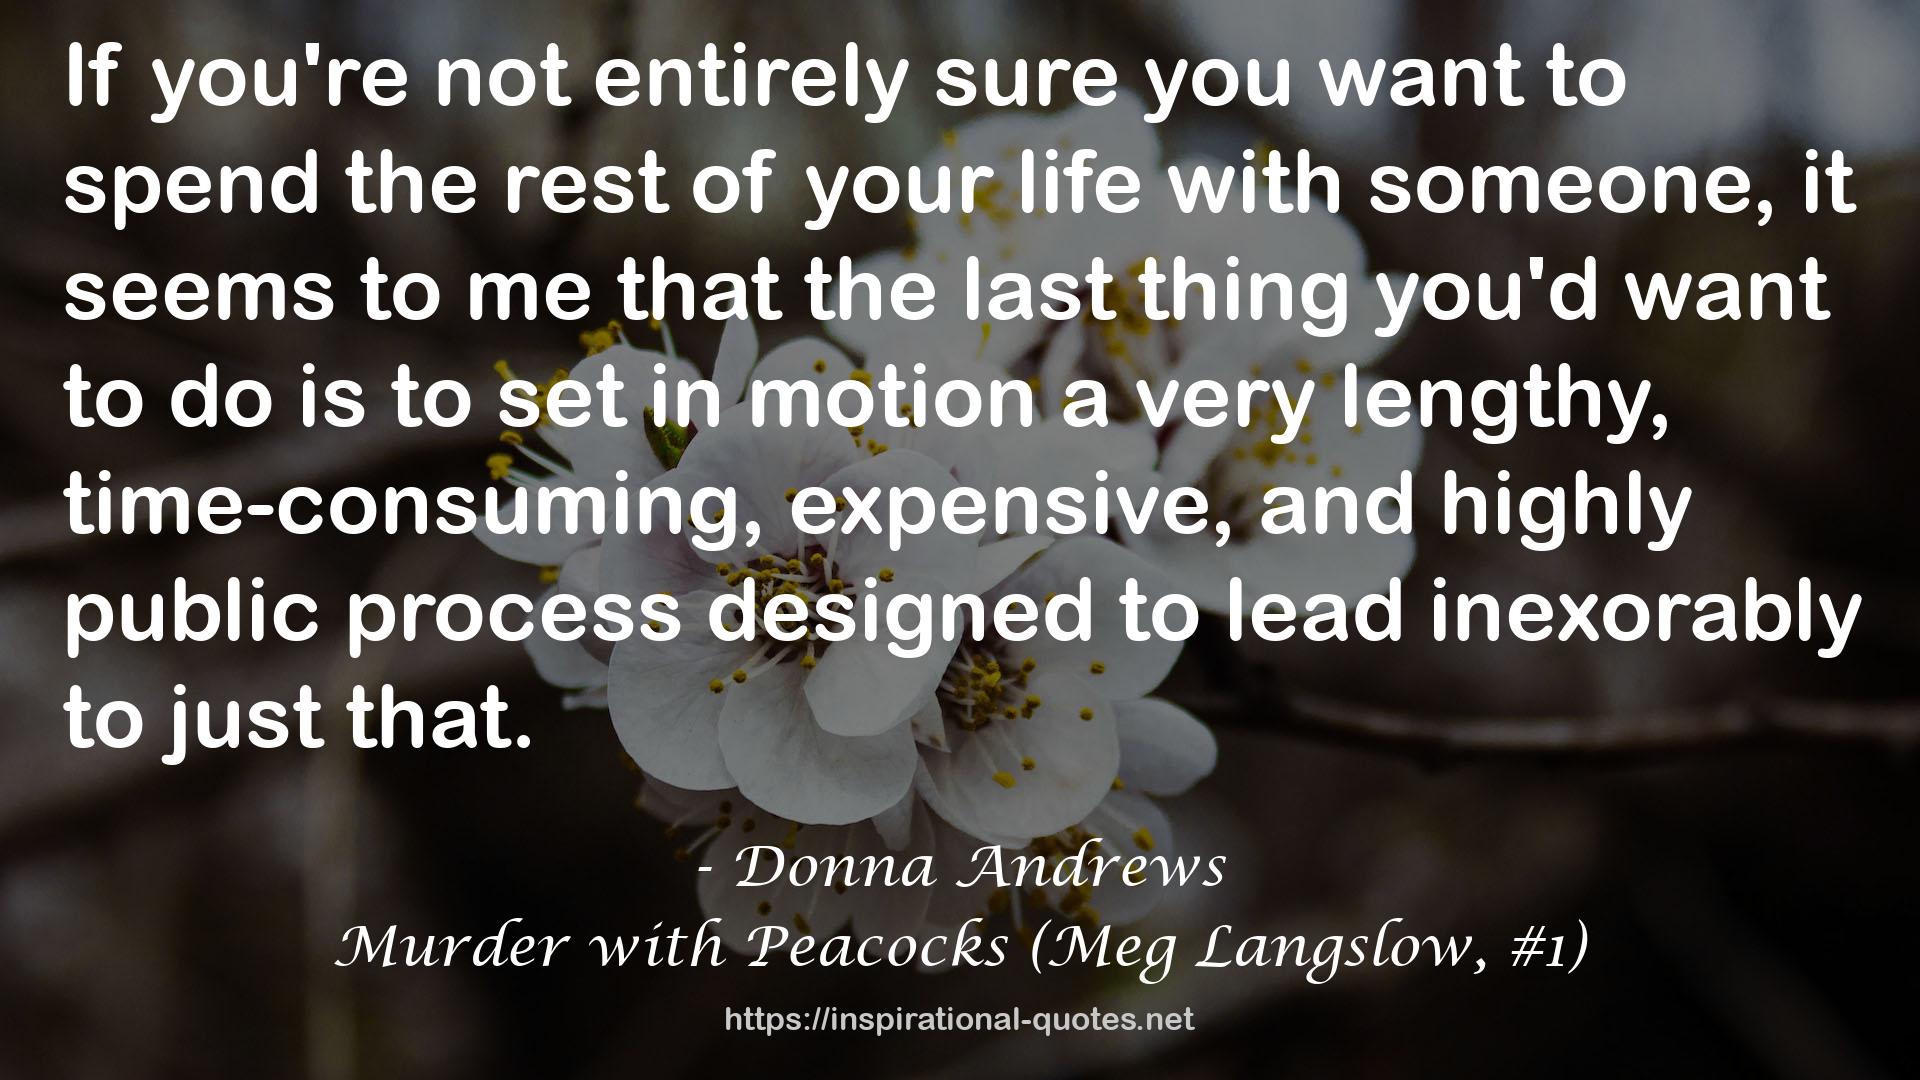 Murder with Peacocks (Meg Langslow, #1) QUOTES